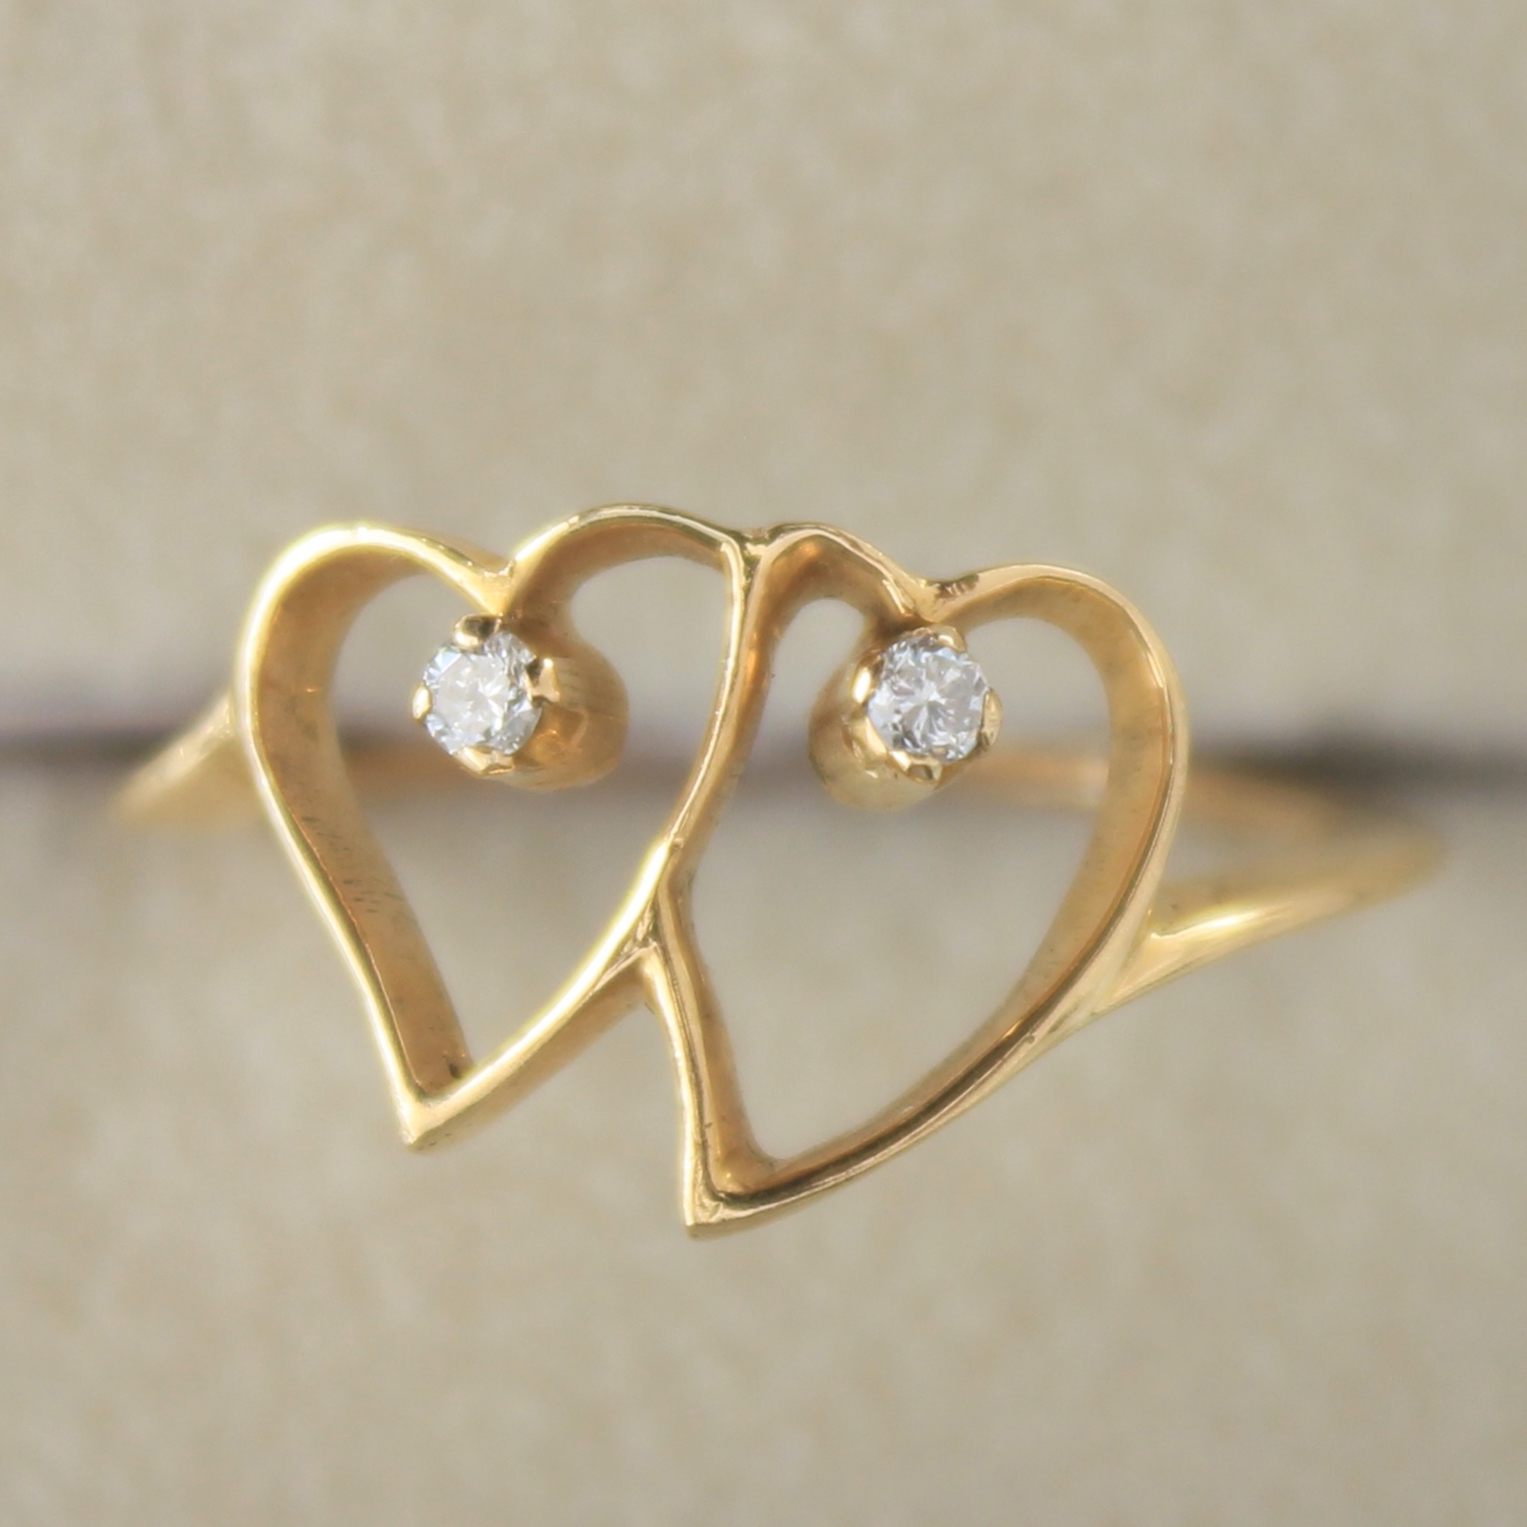 Buy Unique 14K Gold Double Heart Ring | PC Chandra Jewellers